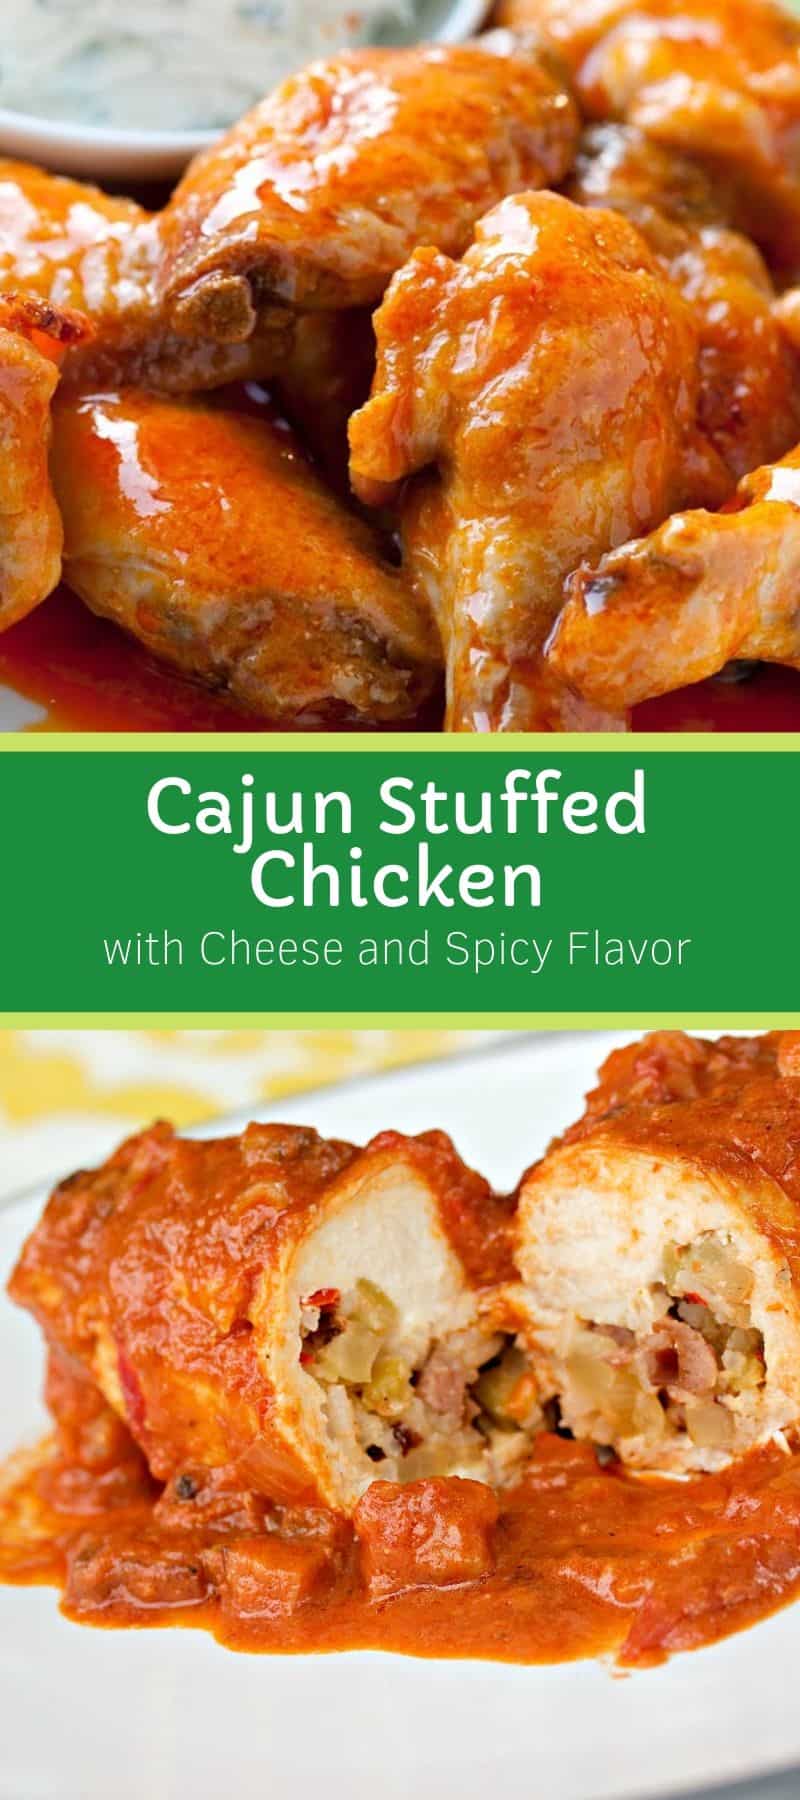 Cajun Stuffed Chicken with Cheese and Spicy Flavor 3